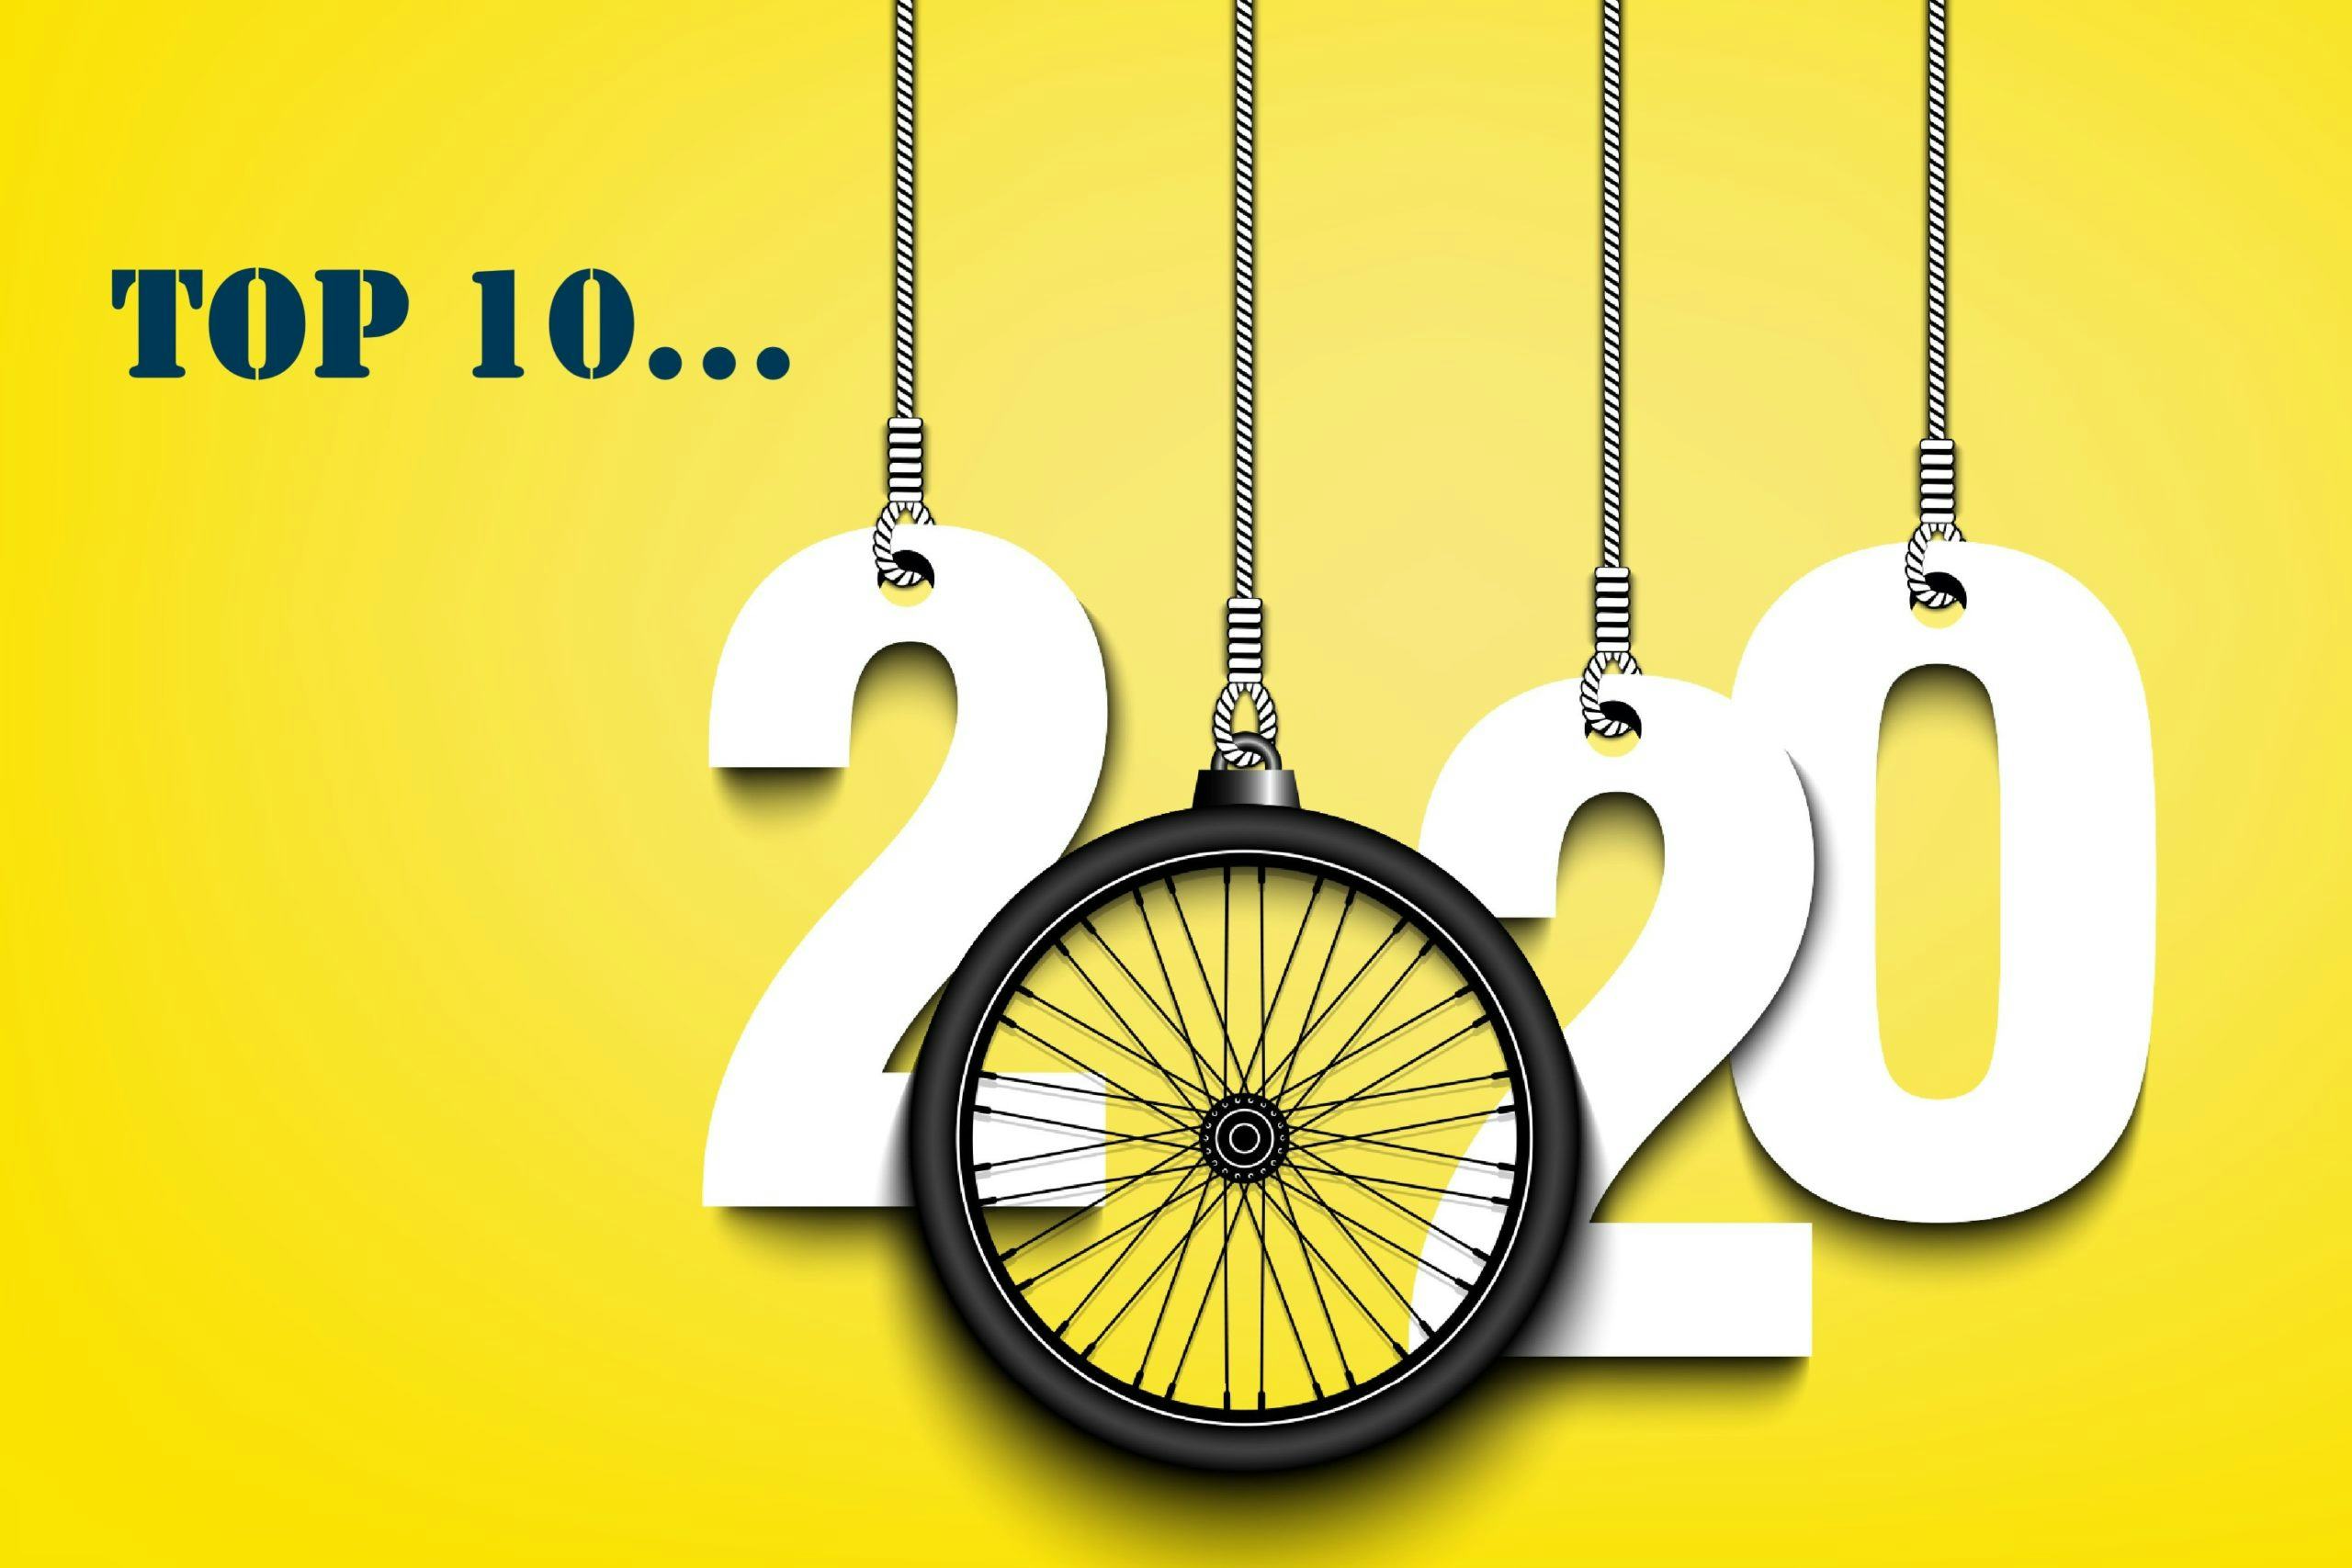 Wrap-up of 2020: Top 10 articles on Bike Europe